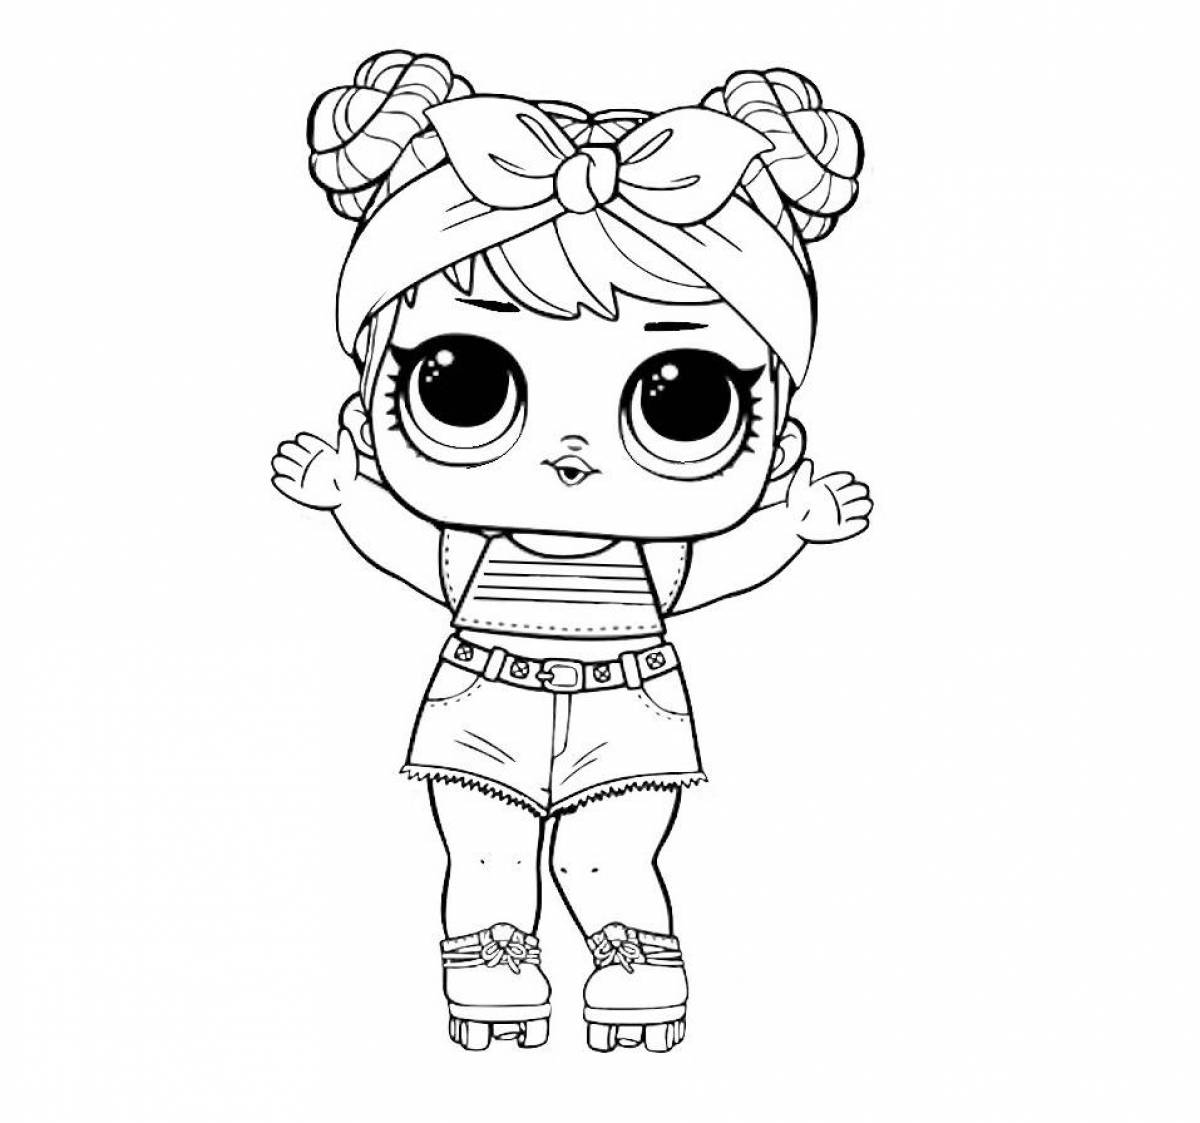 Awesome lola dolls coloring pages for kids